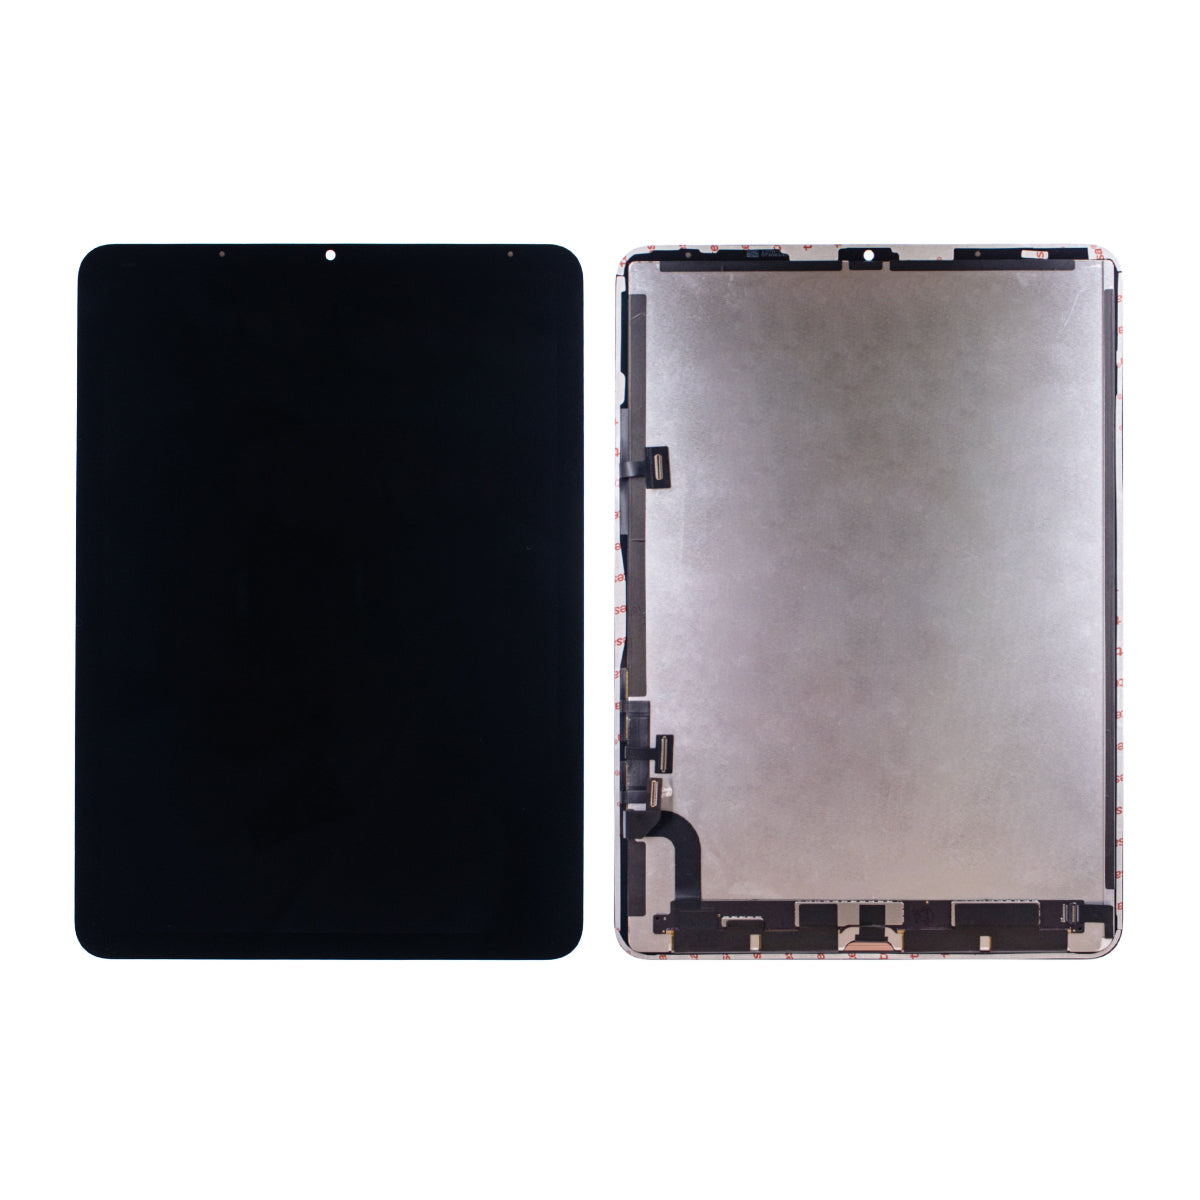 LCD Screen Digitizer Assembly Compatible For iPad Air 5